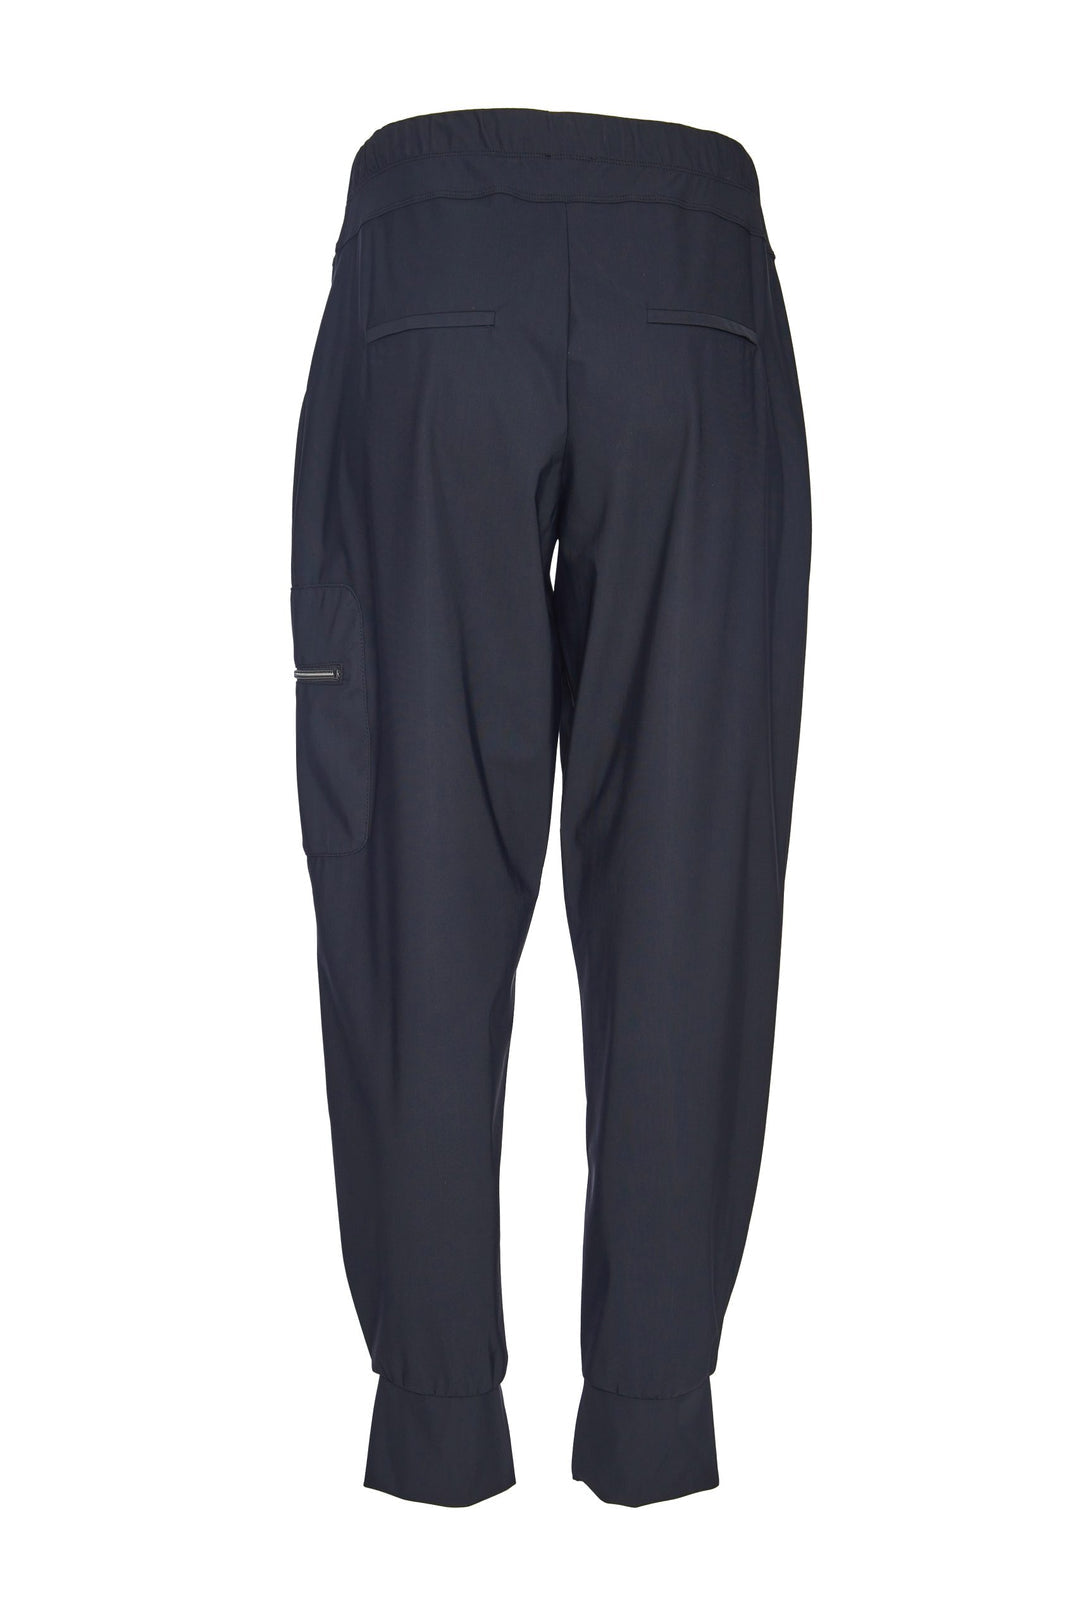 NAYA cuff travel fabric trousers with zip pockets in anthracite